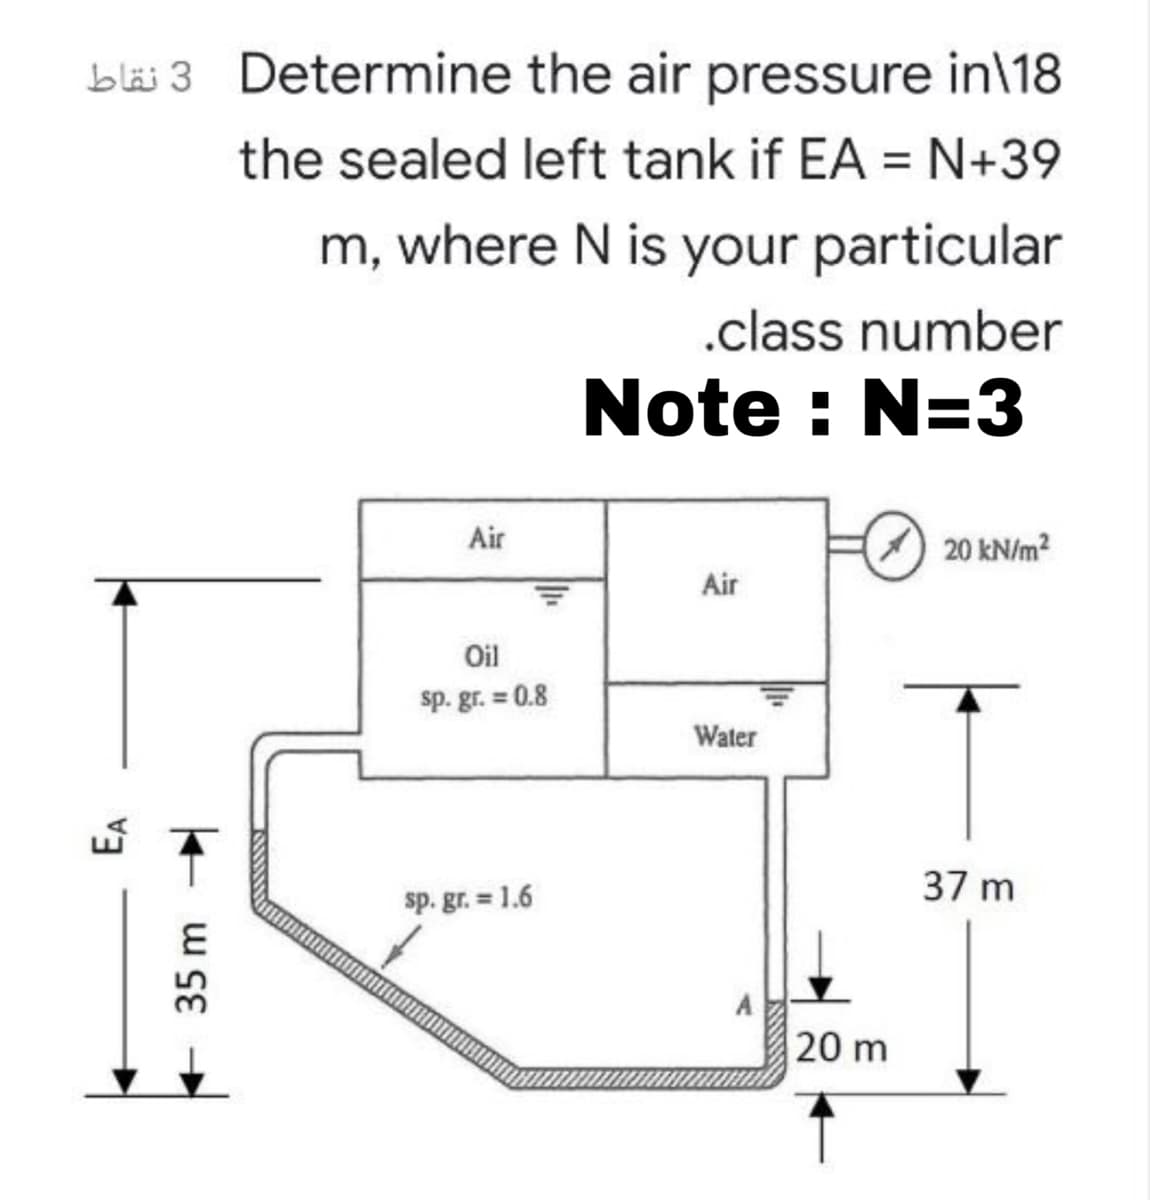 b läi 3 Determine the air pressure in\18
the sealed left tank if EA = N+39
m, where N is your particular
.class number
Note : N=3
Air
A 20 kN/m?
Air
Oil
sp. gr. = 0.8
Water
37 m
sp. gr. = 1.6
A
20 m
EA
+ w SE
